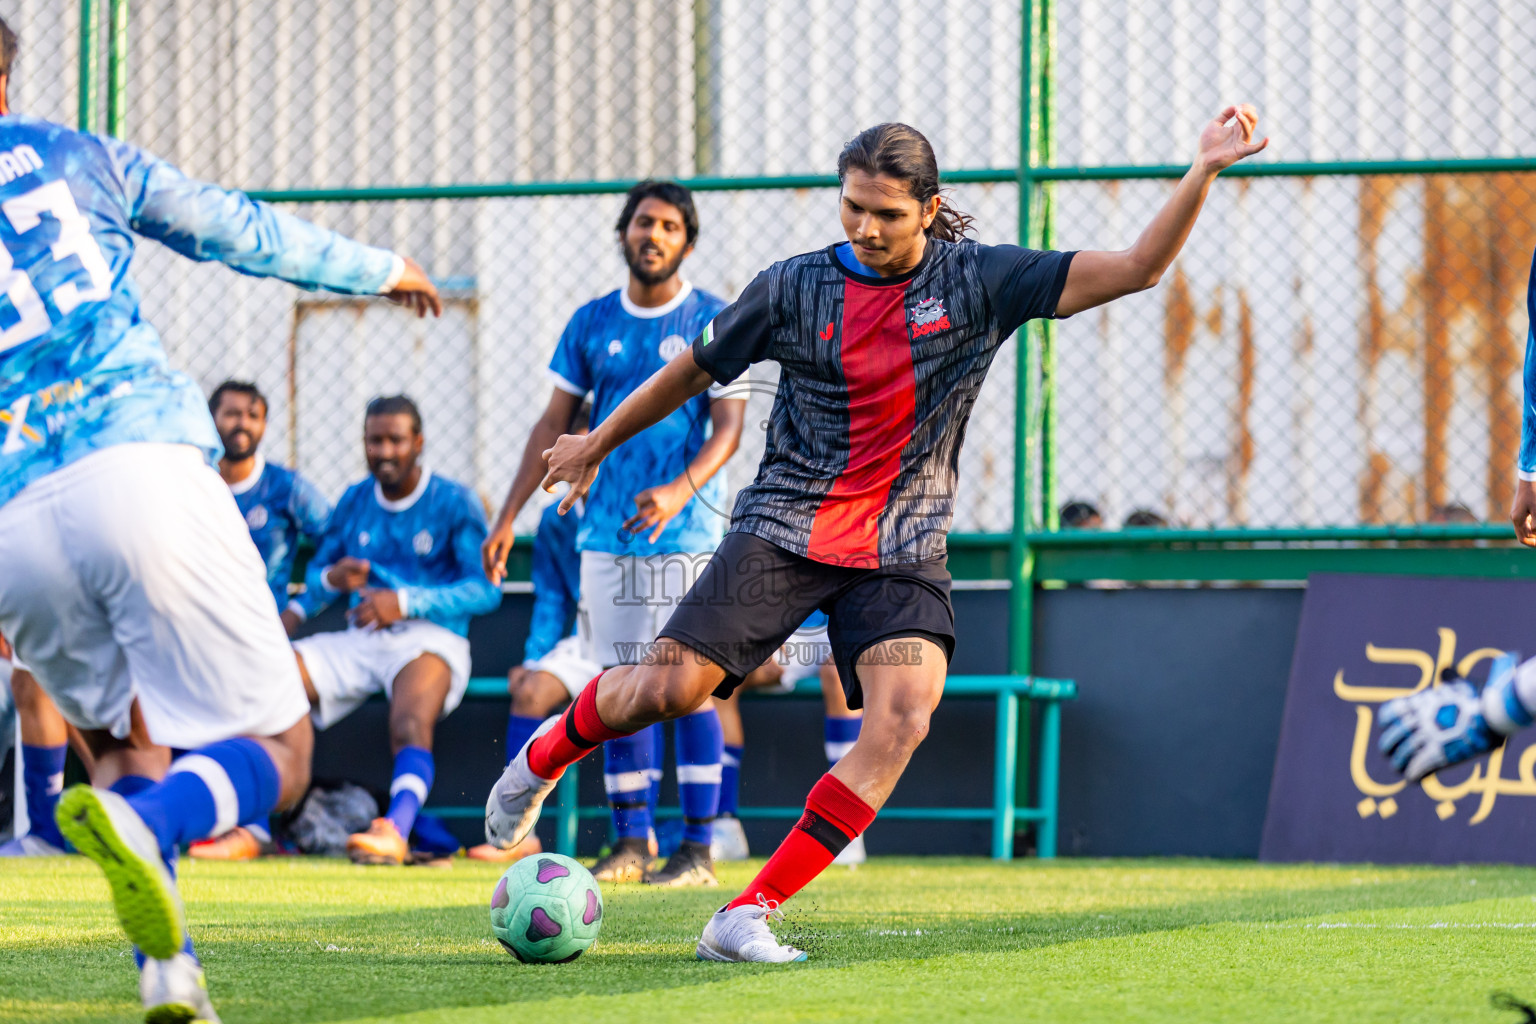 Bows vs Holiday SC in Day 10 of BG Futsal Challenge 2024 was held on Thursday, 21st March 2024, in Male', Maldives Photos: Nausham Waheed / images.mv